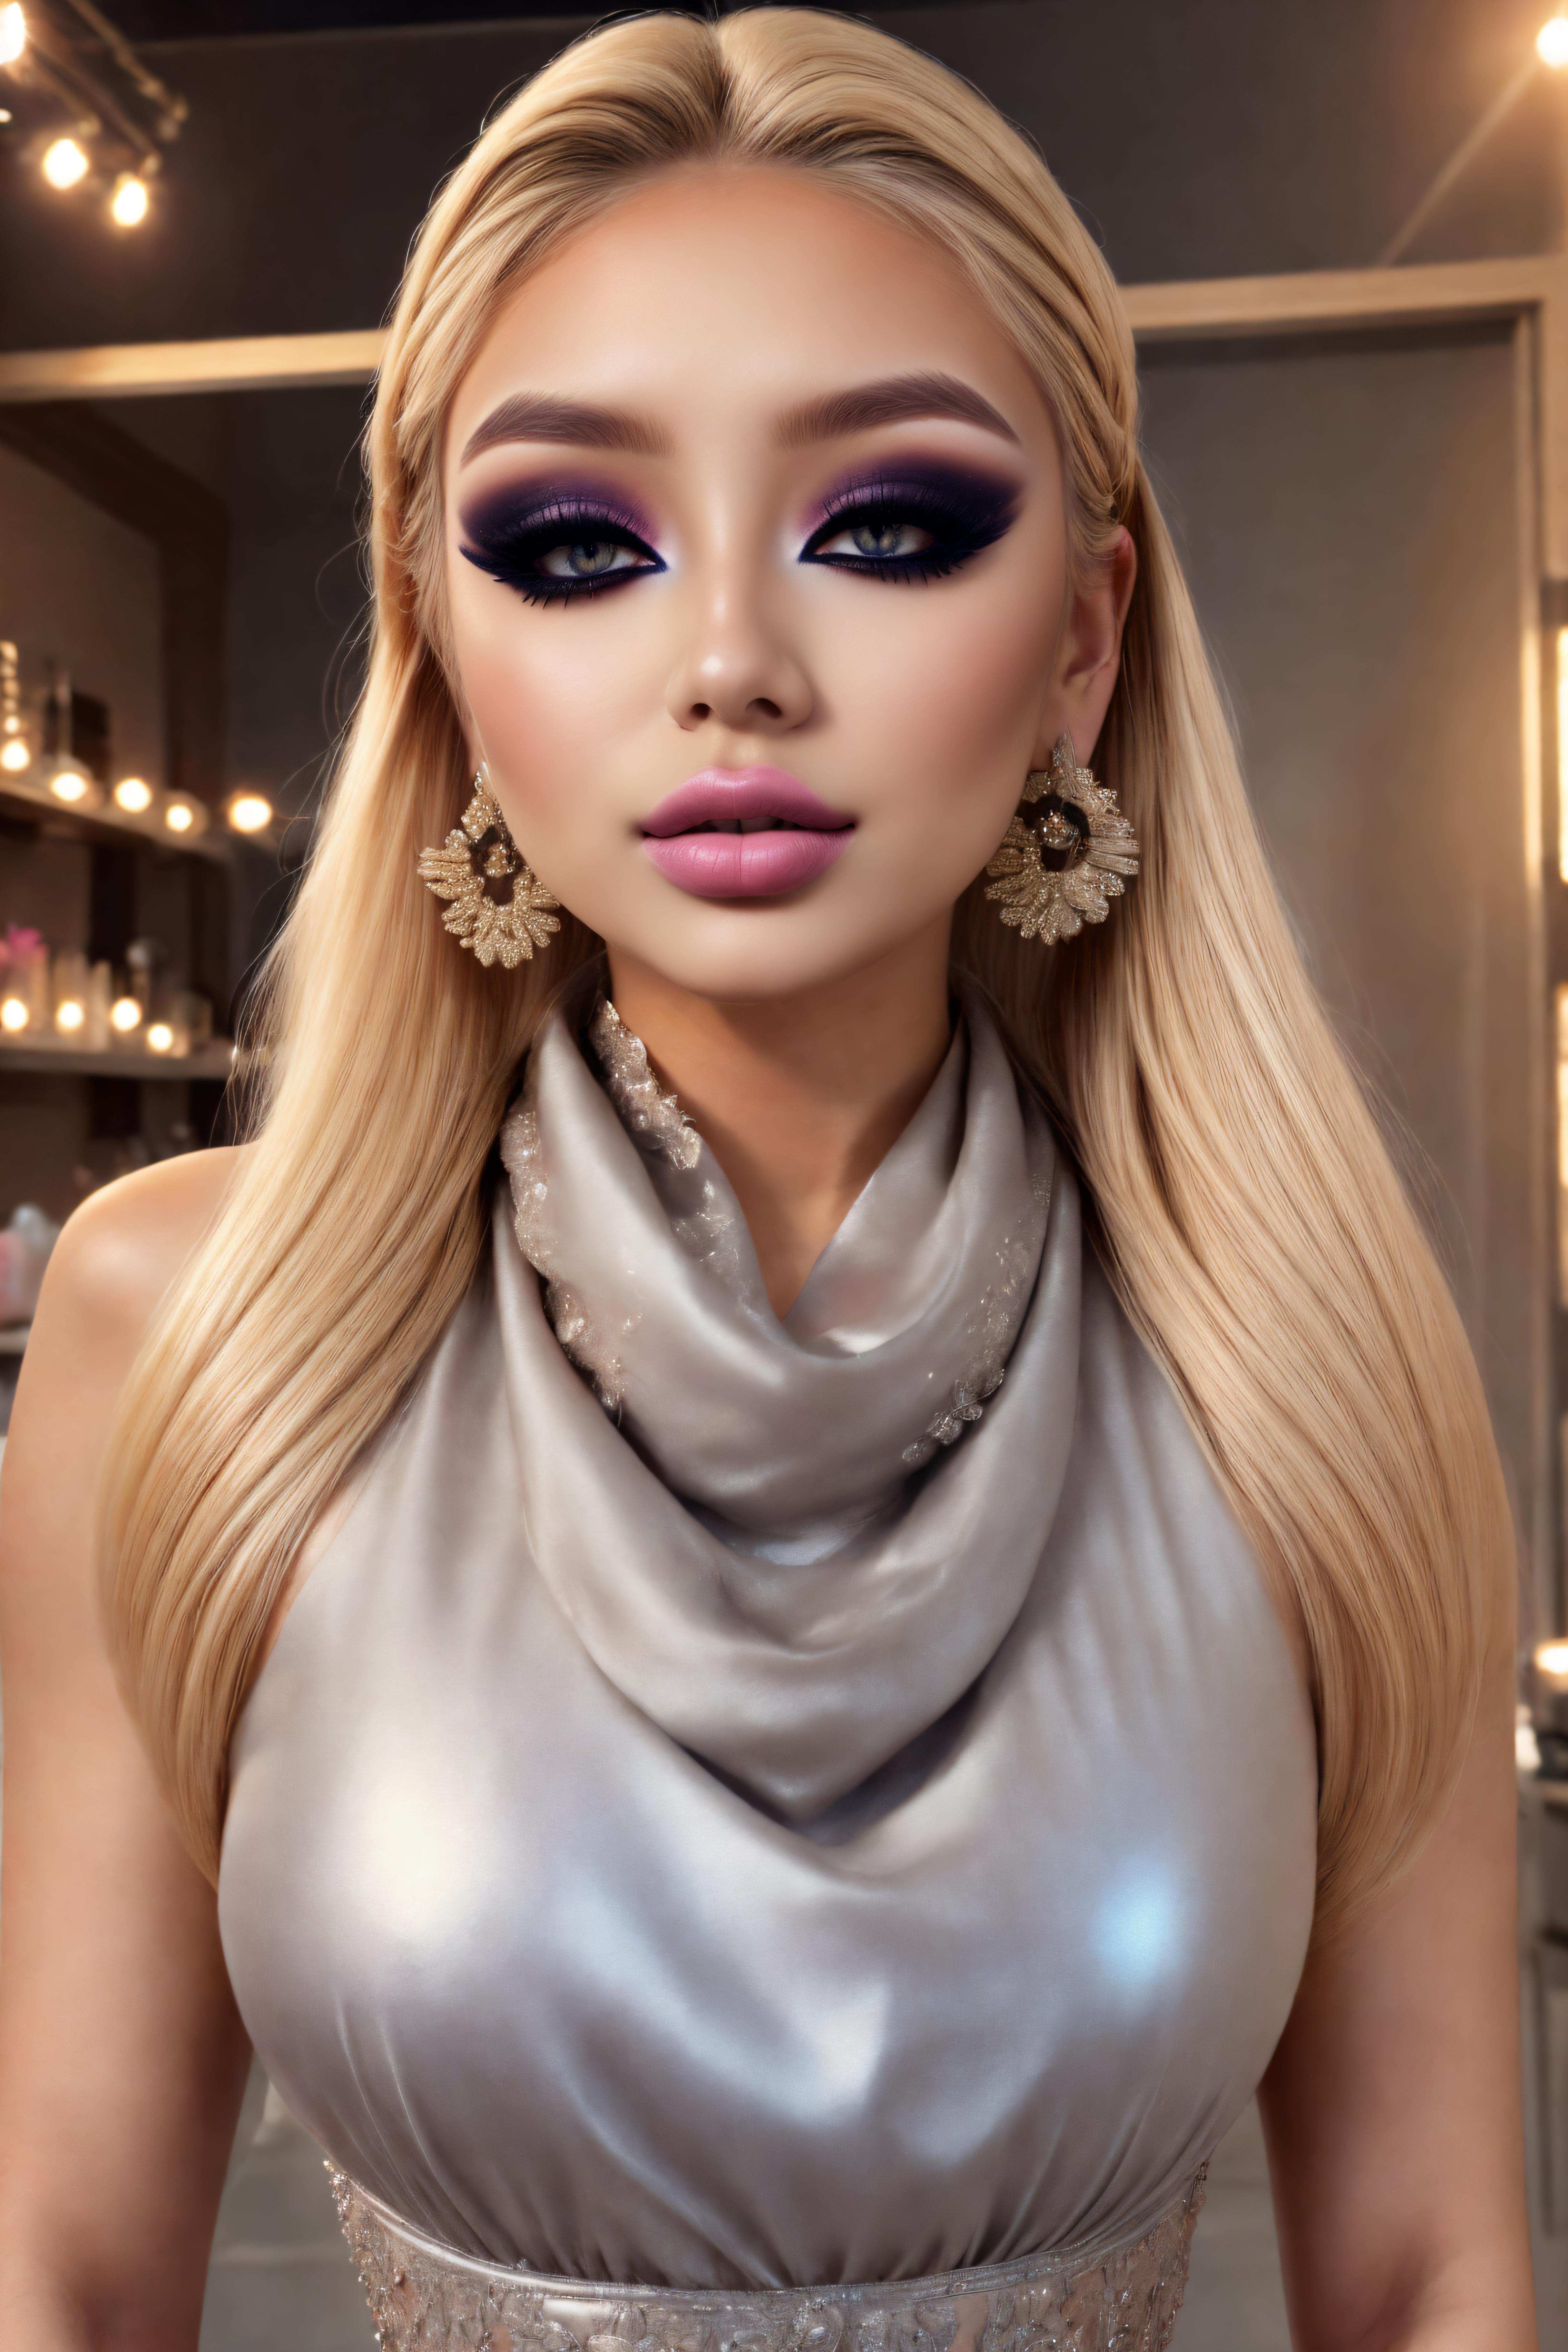 All-in-one Hairstyle Bundle image by CTW